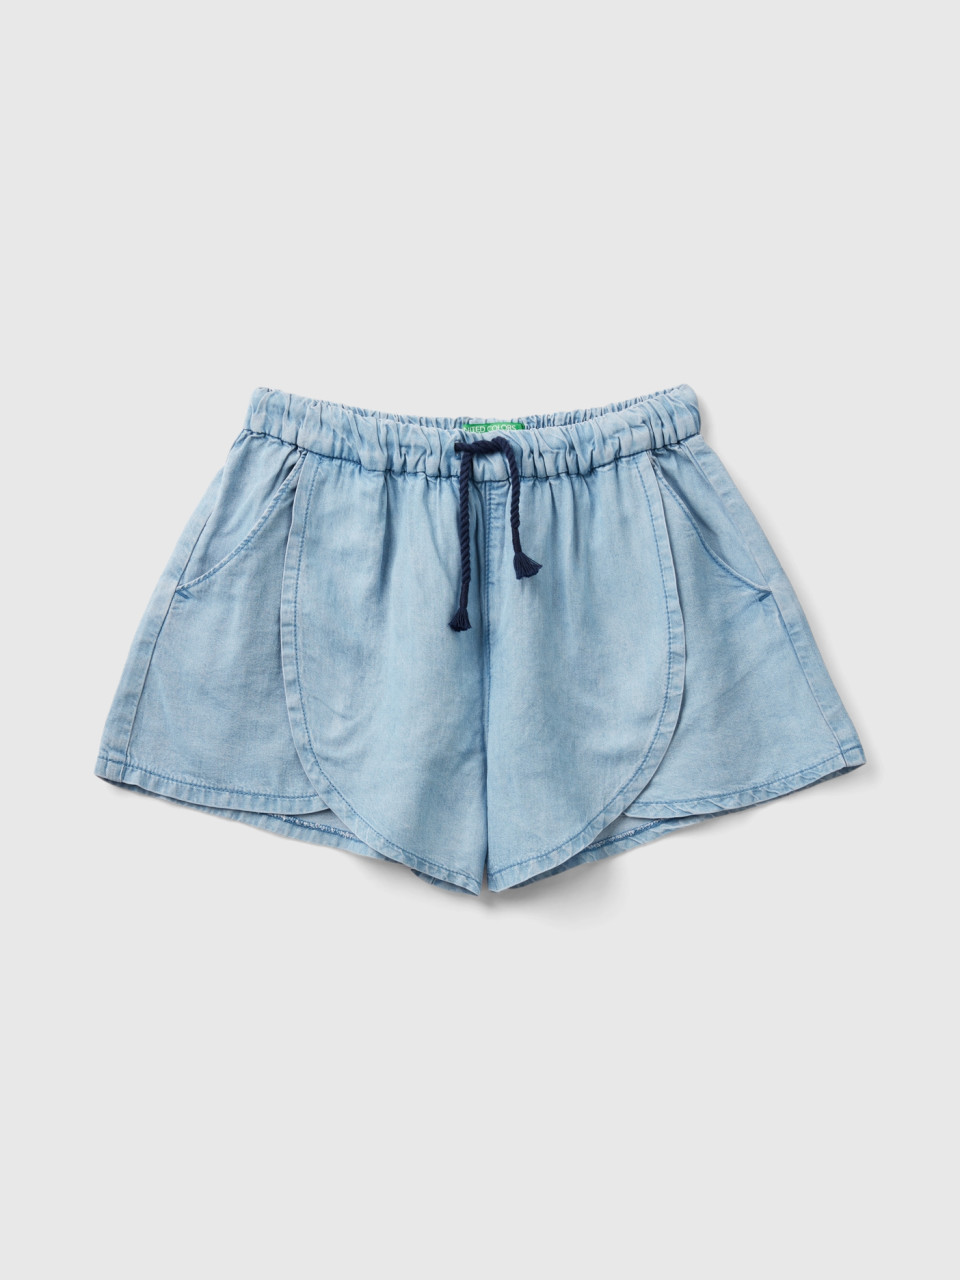 Benetton, Short Trousers In Sustainable Viscose, Light Blue, Kids